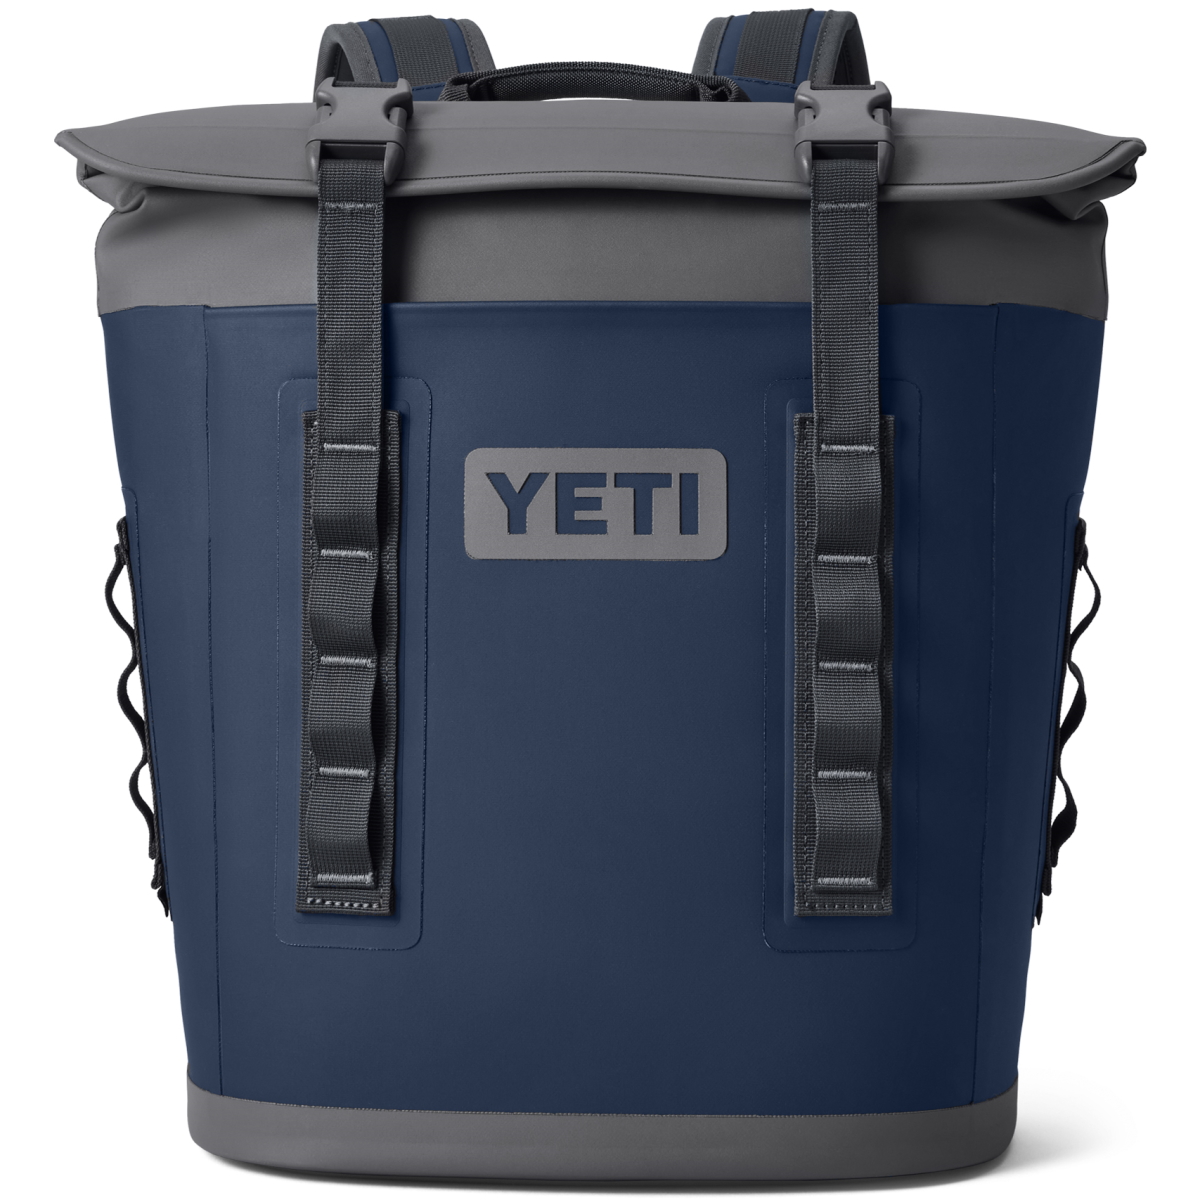 YETI's bag collection will make the perfect holiday gift